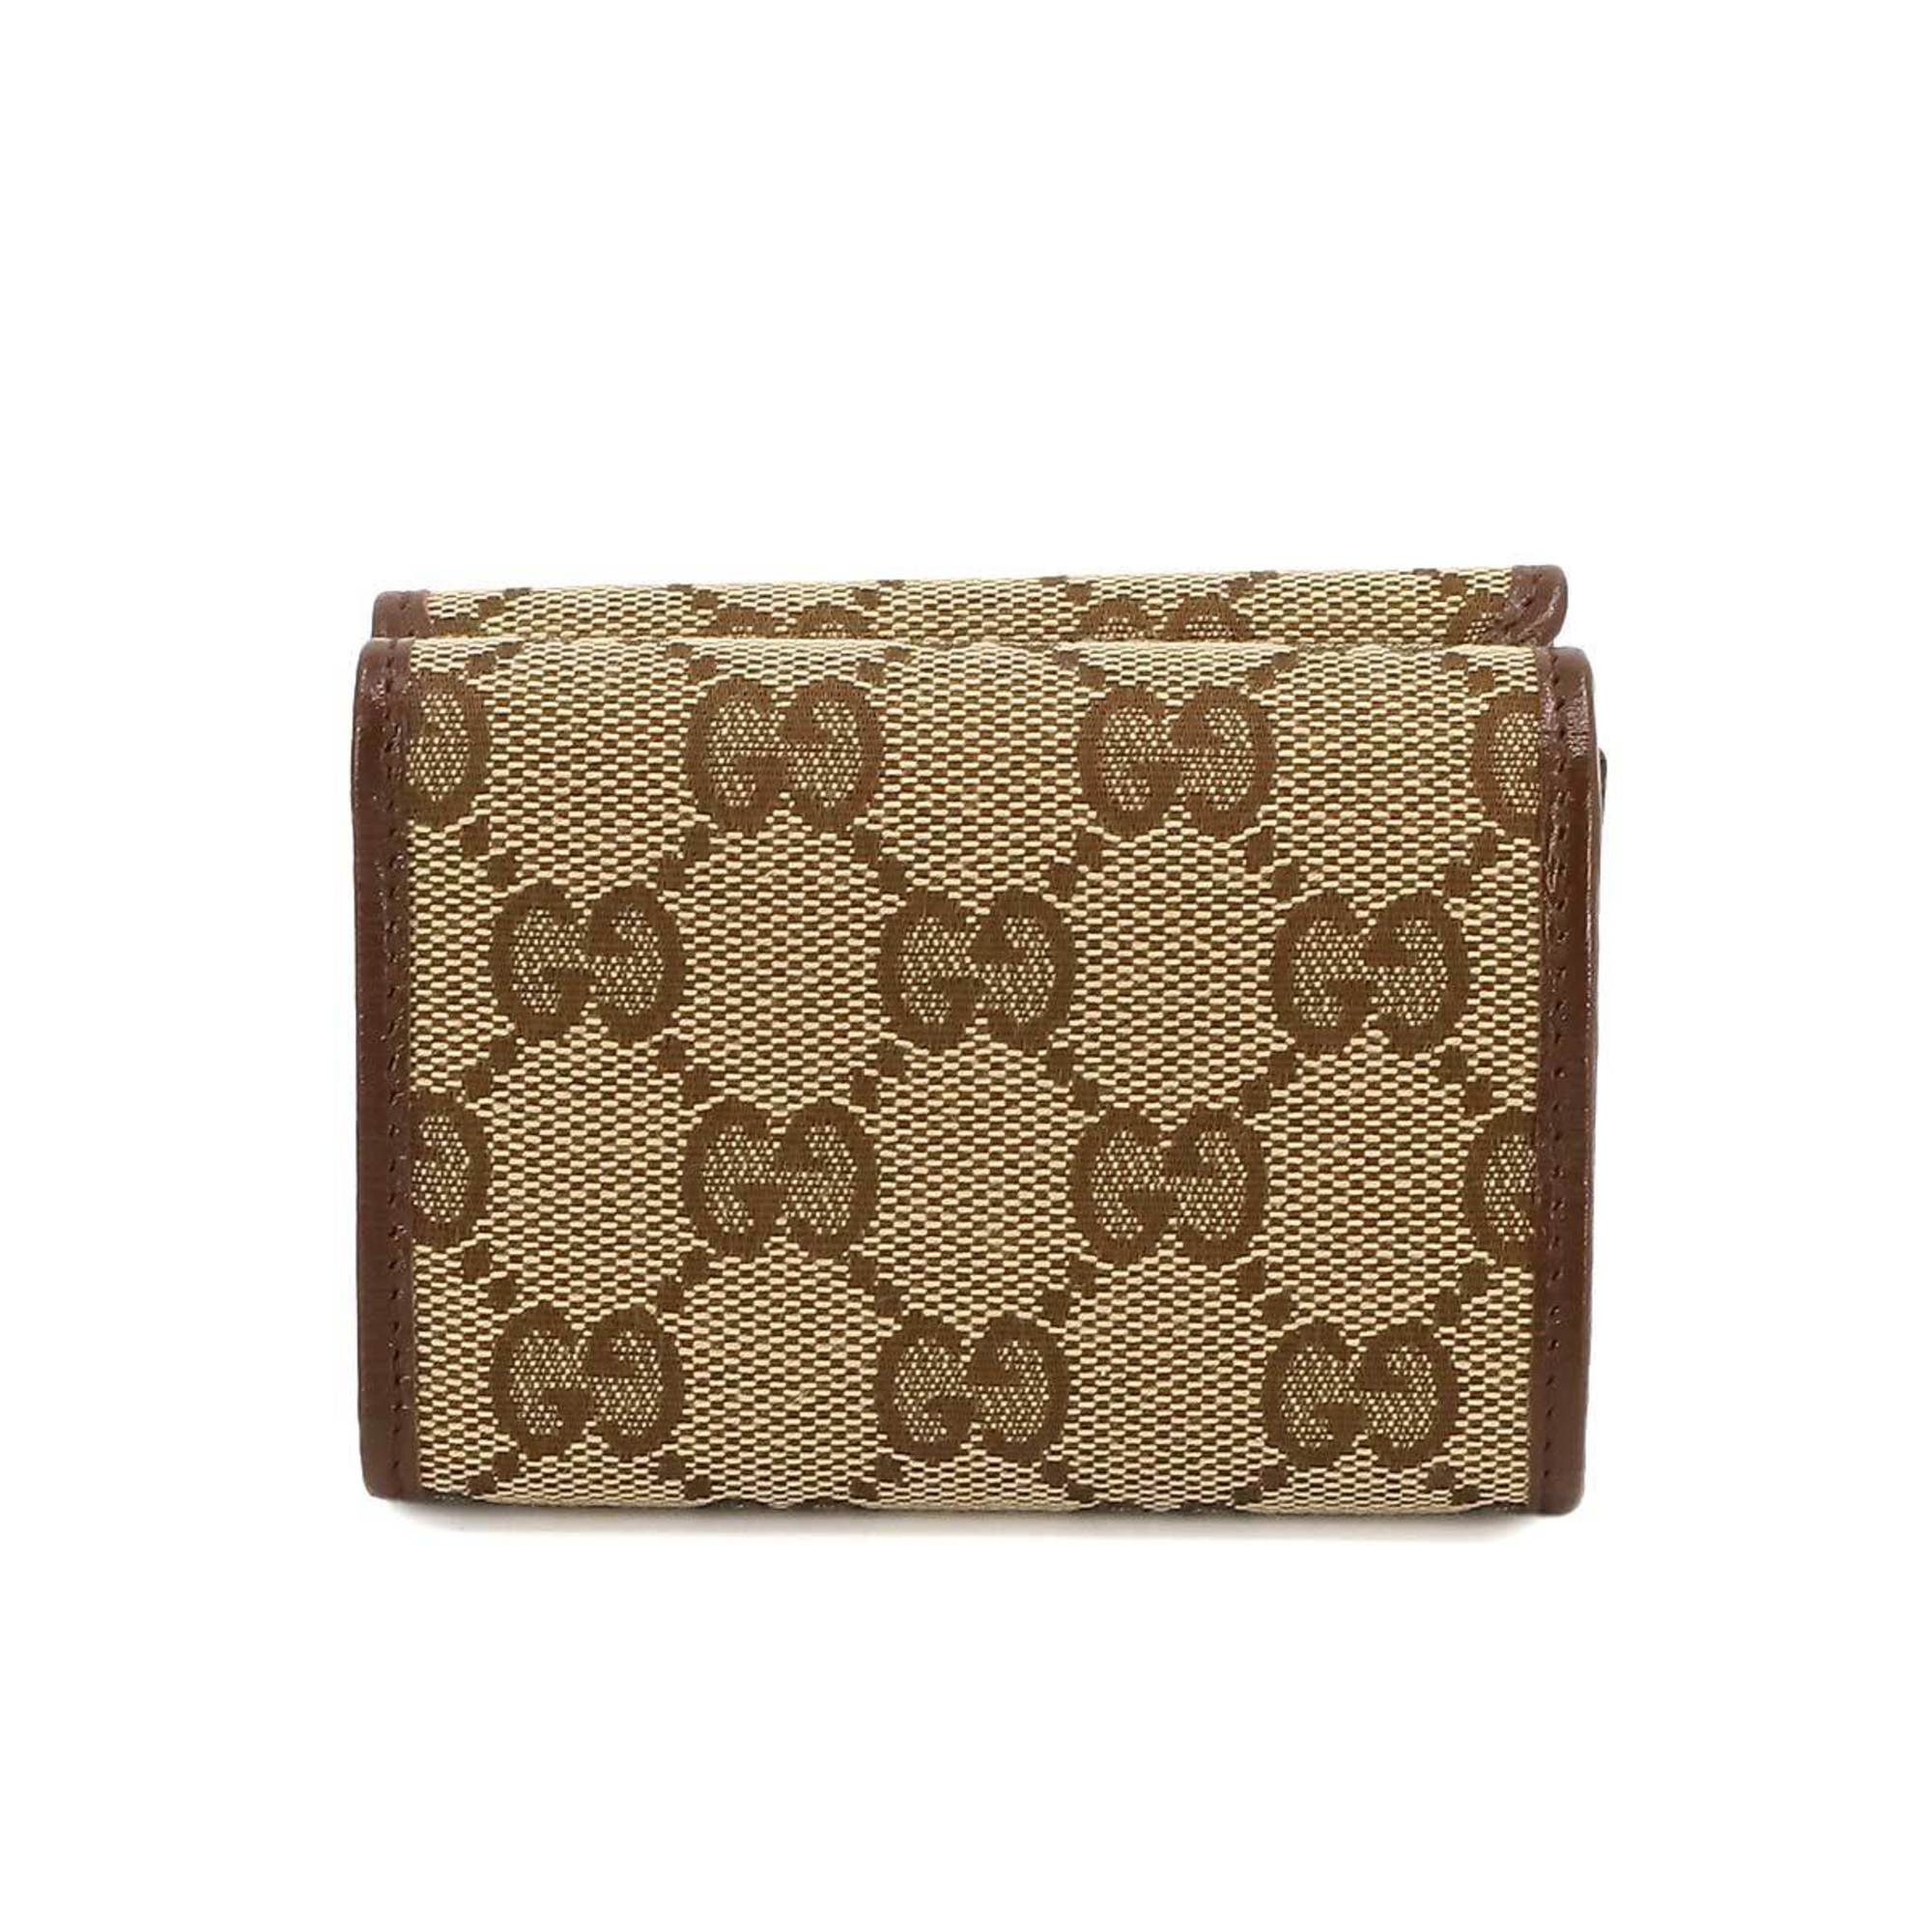 GUCCI BALENCIAGA The Hacker Project Tri-fold Wallet GG Canvas Leather Beige Brown 681708